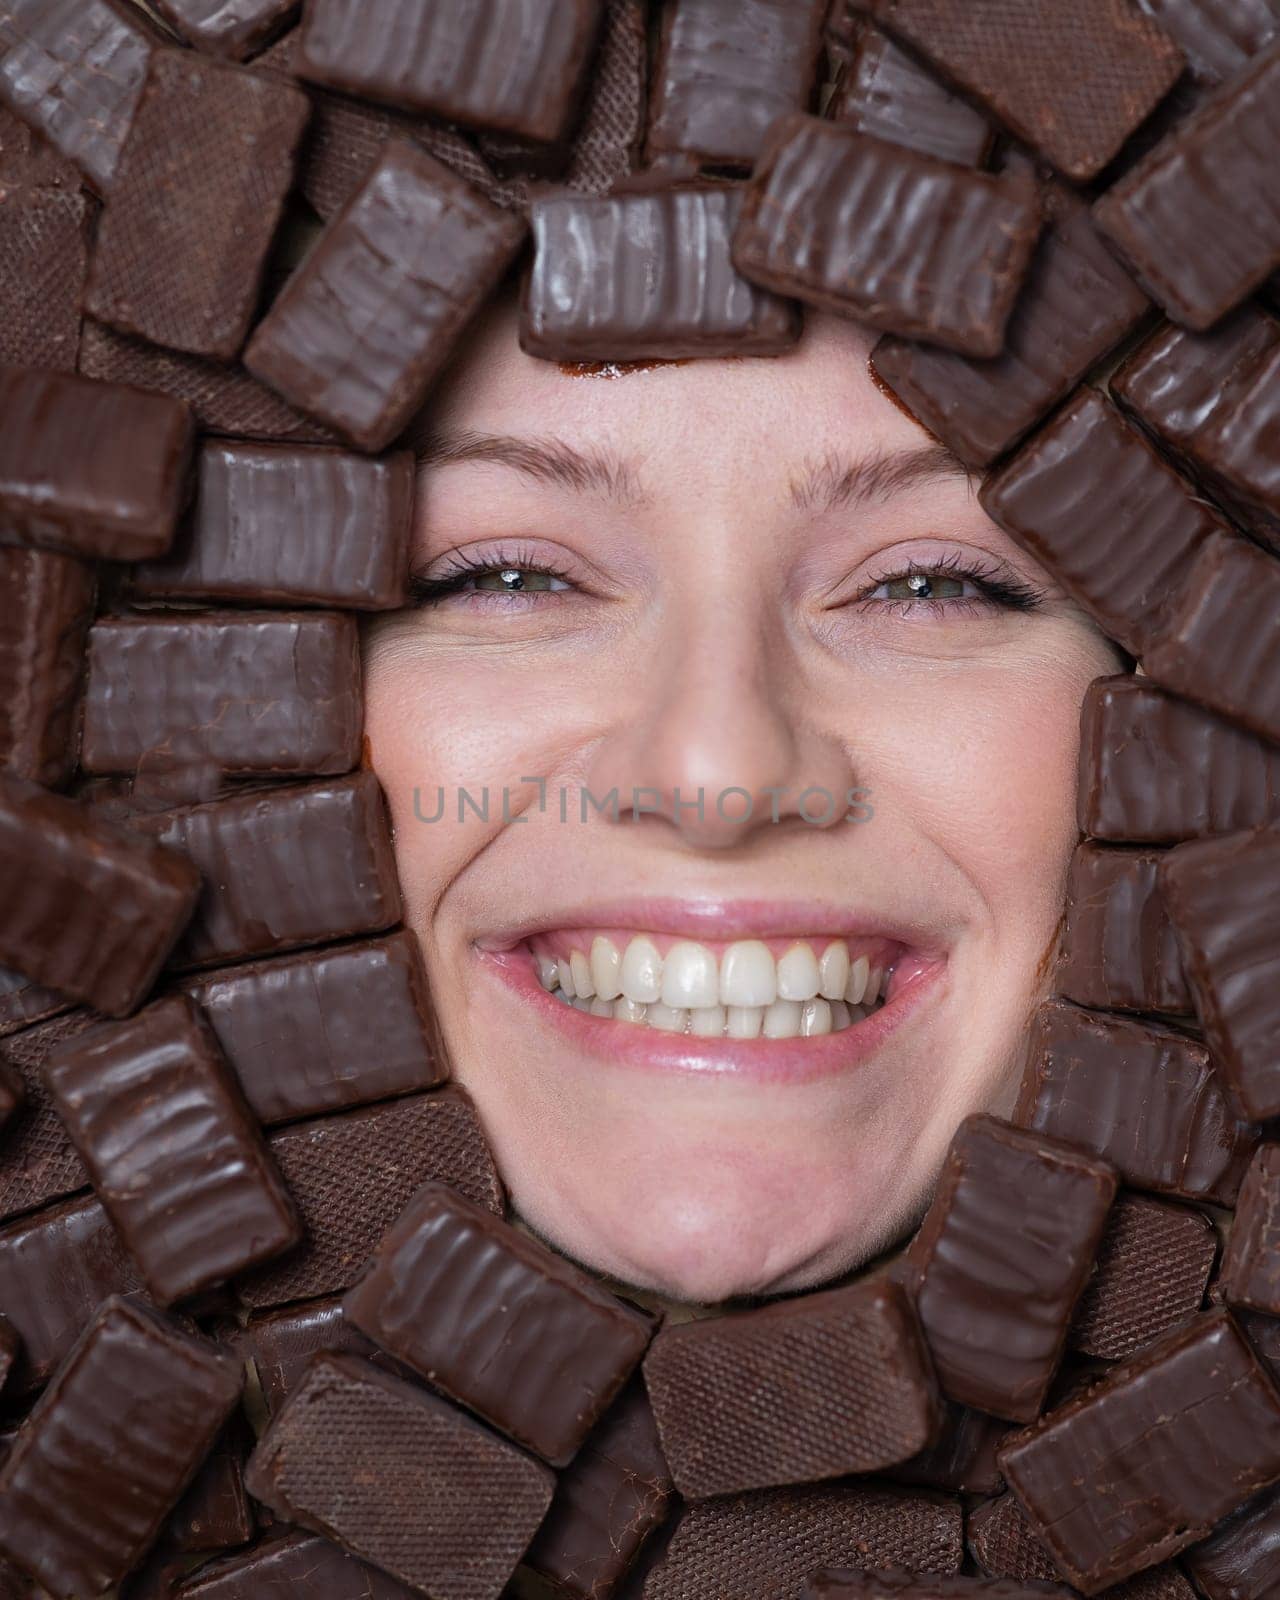 Face of caucasian woman surrounded by chocolates. by mrwed54